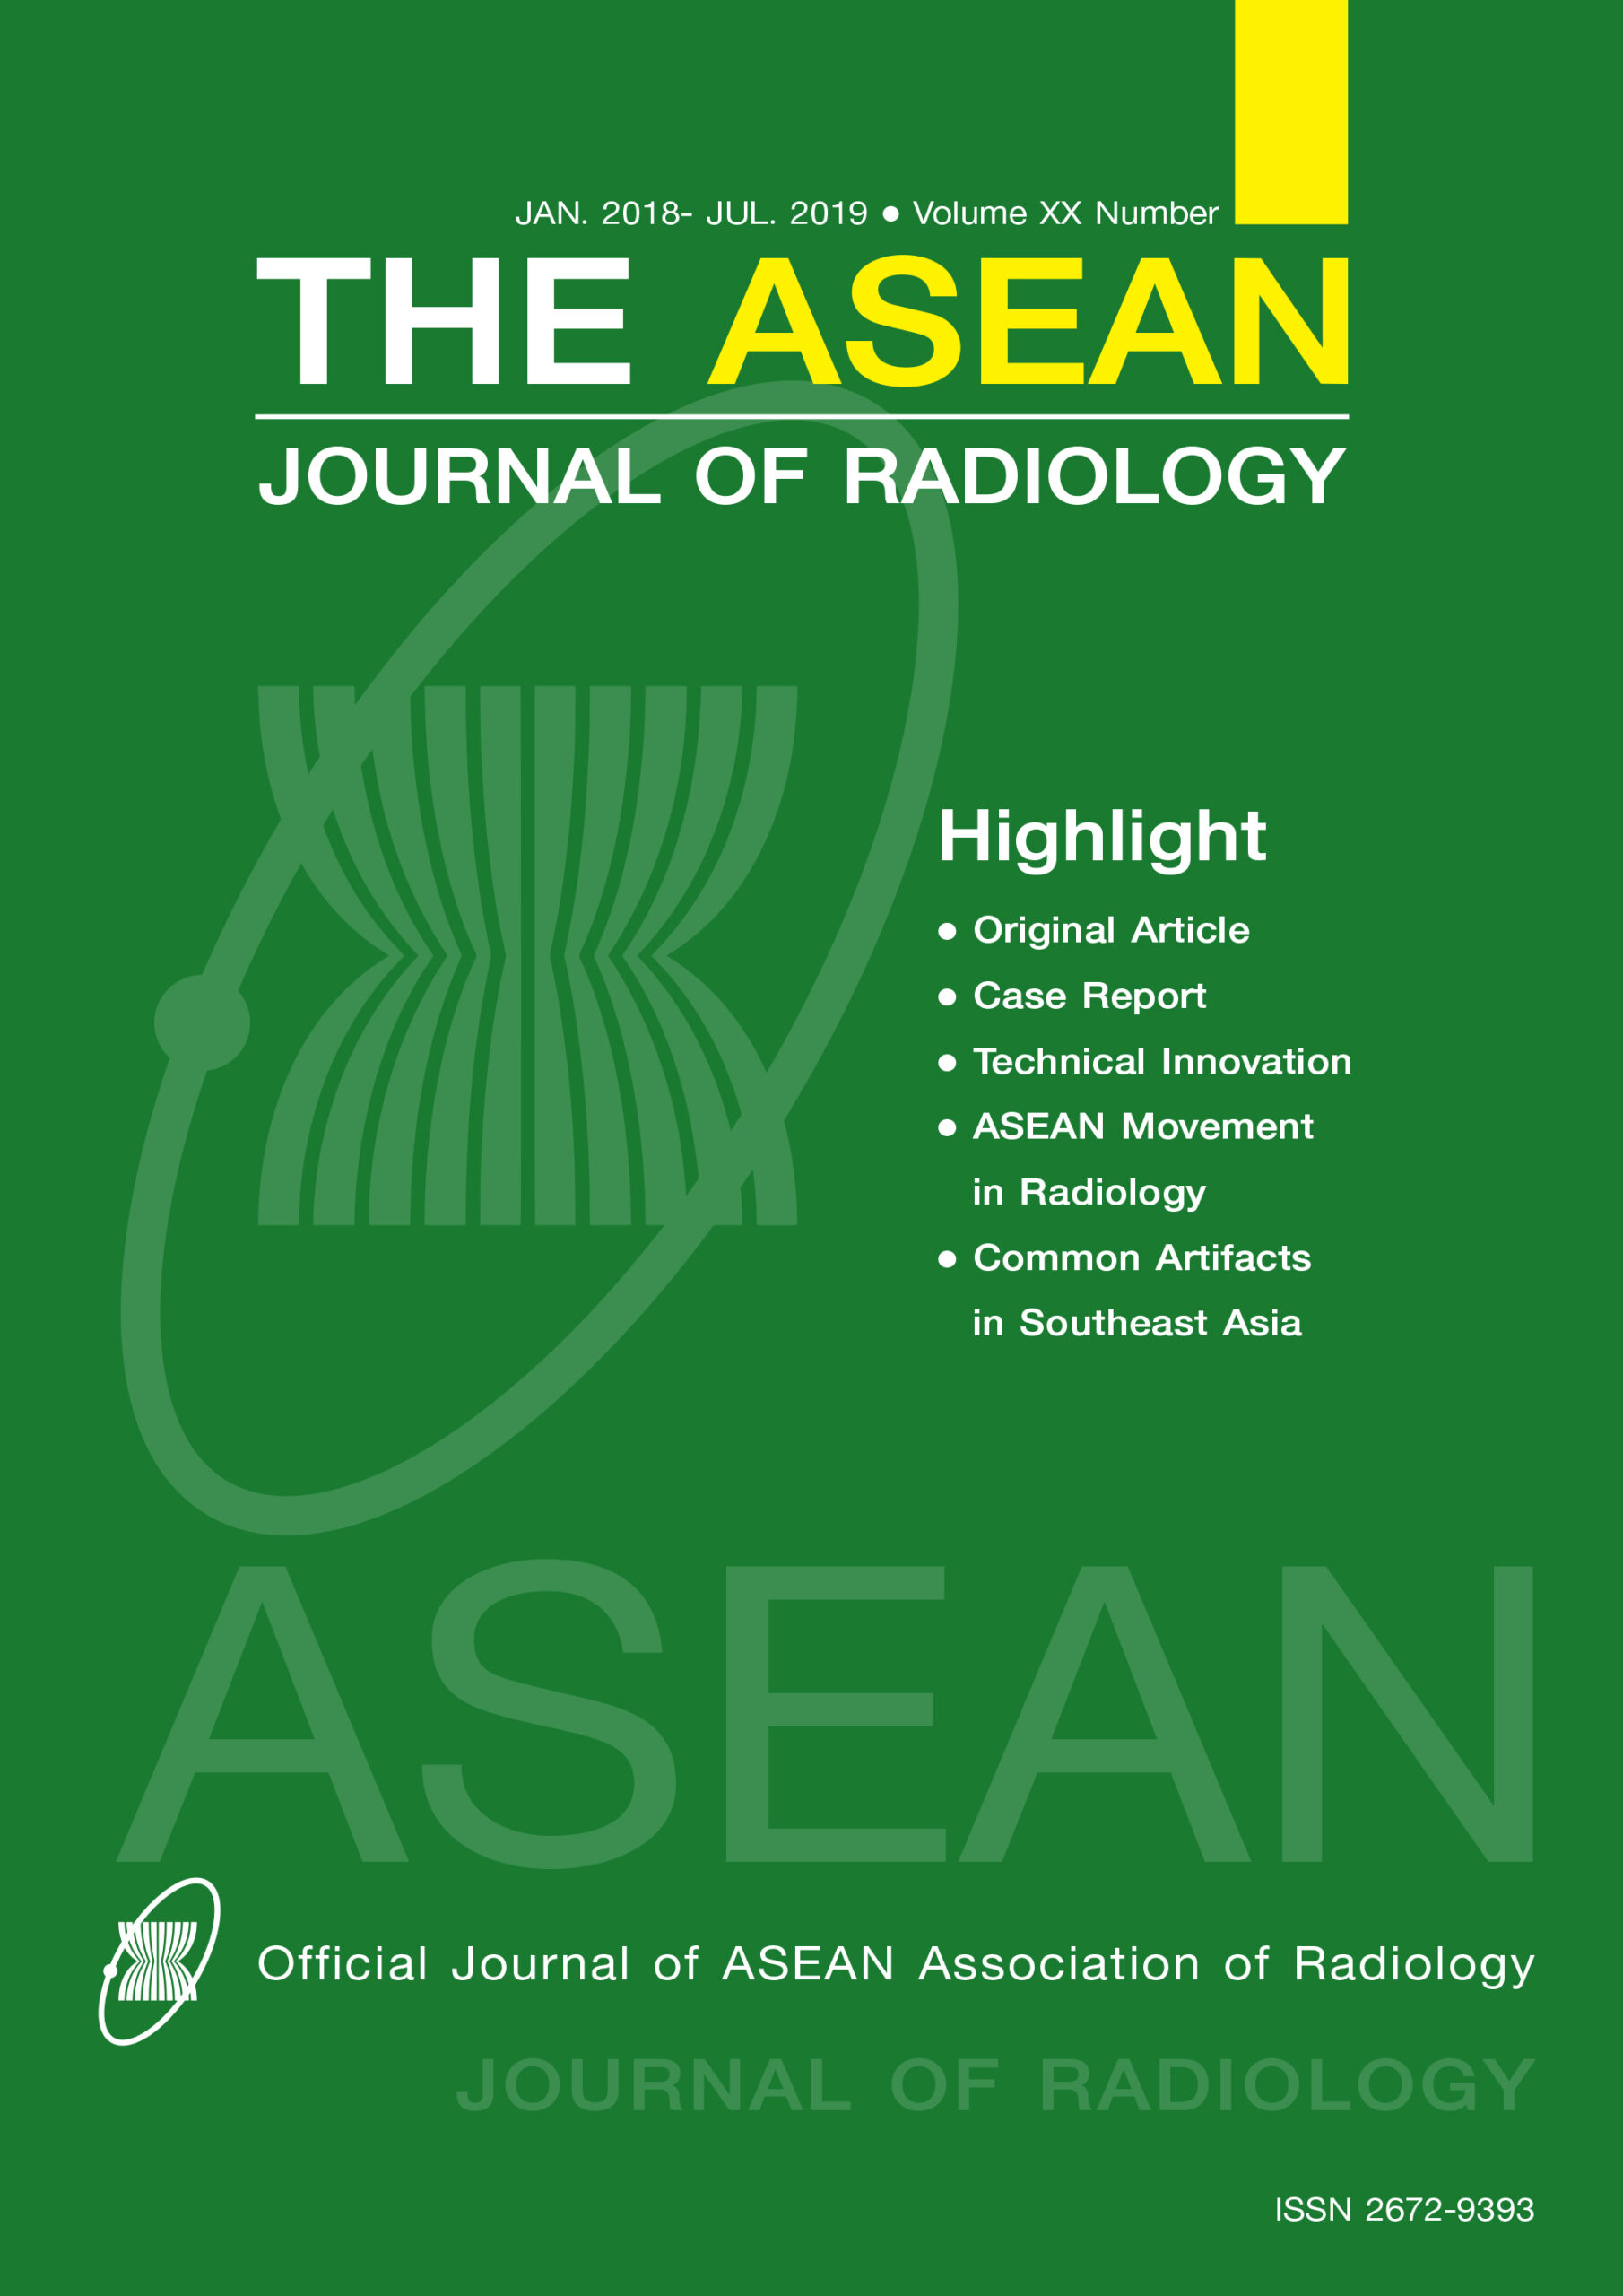 Vol. 20 No. 1 (2019): The first fully online issue of The ASEAN Journal of Radiology